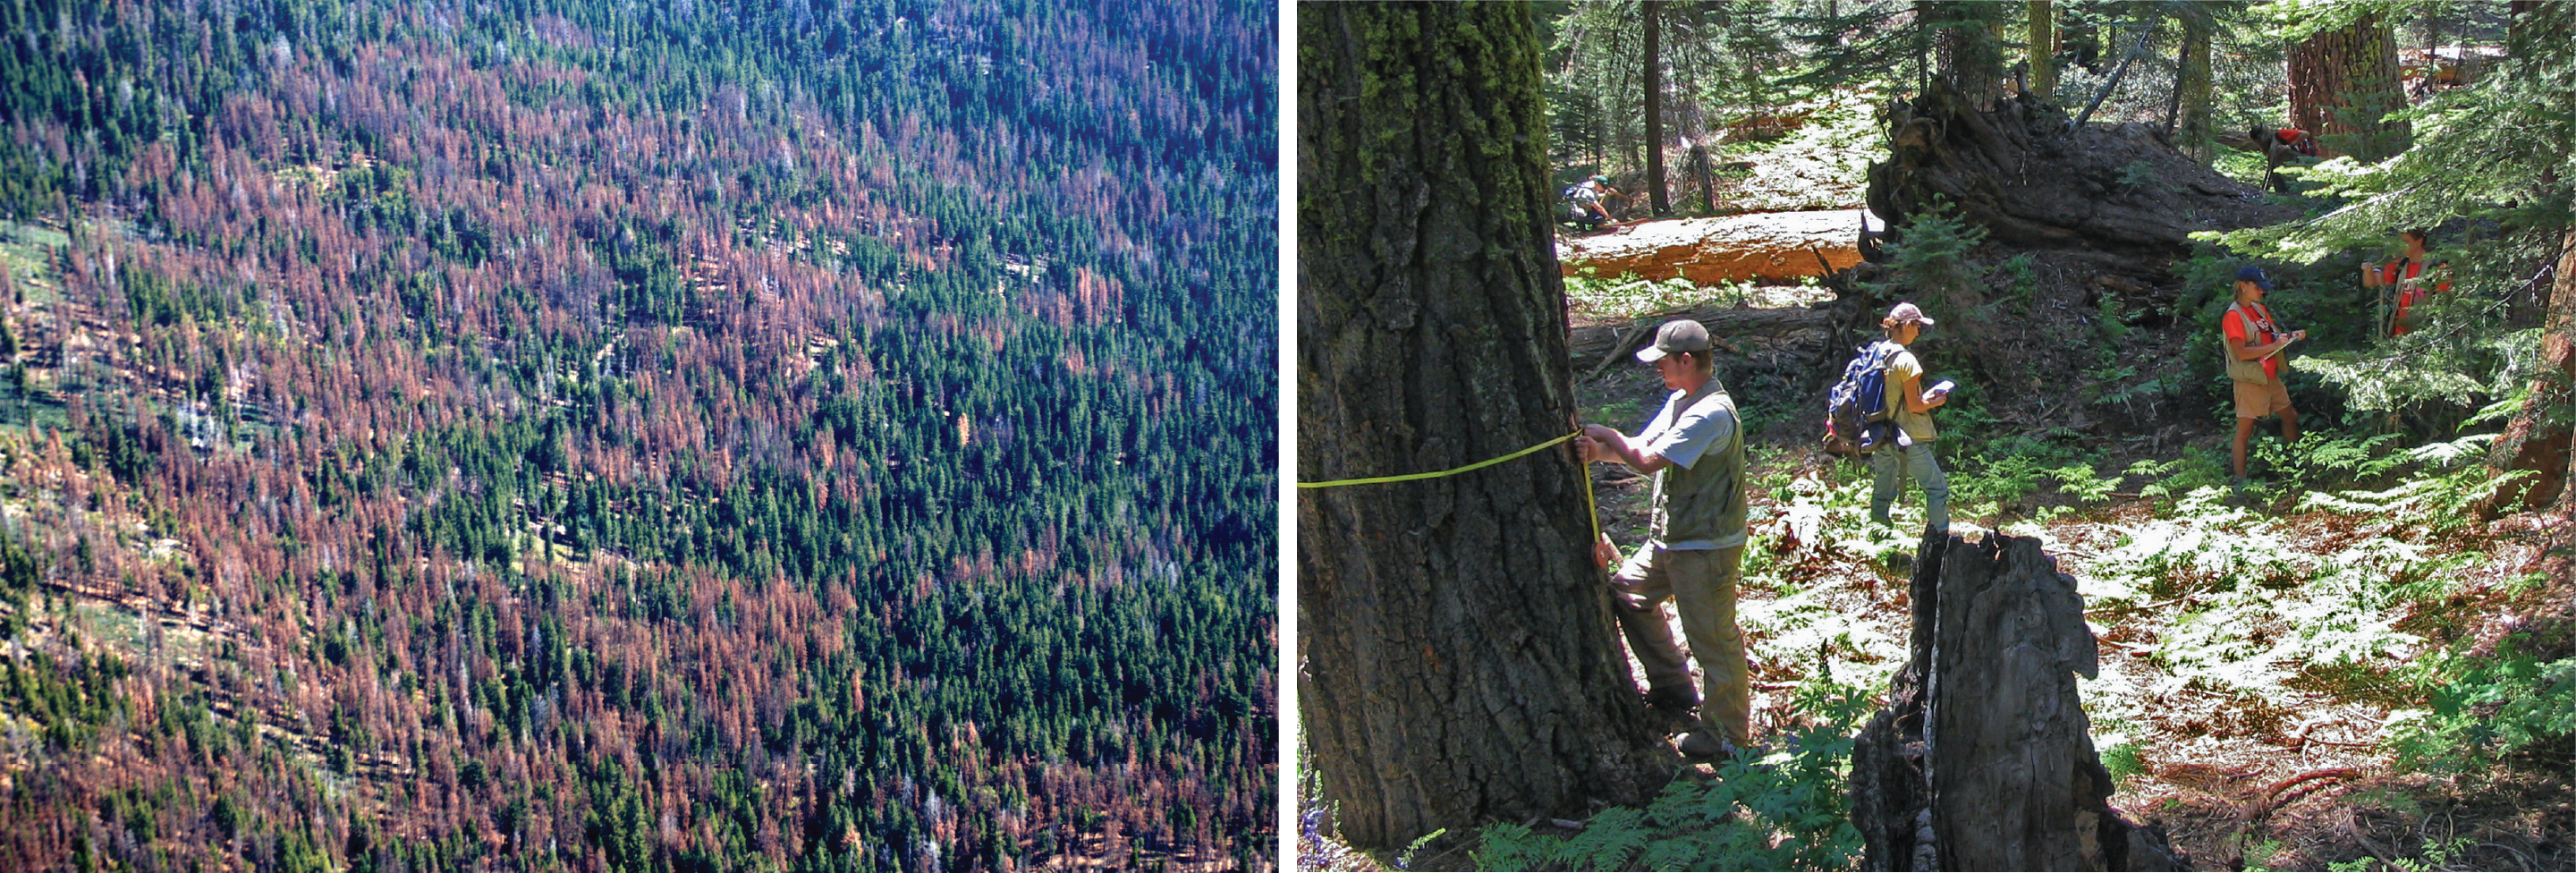 Left: brown dead trees are visible in an aerial photograph; right: a group of people measure tree trunks in a forest clearing.